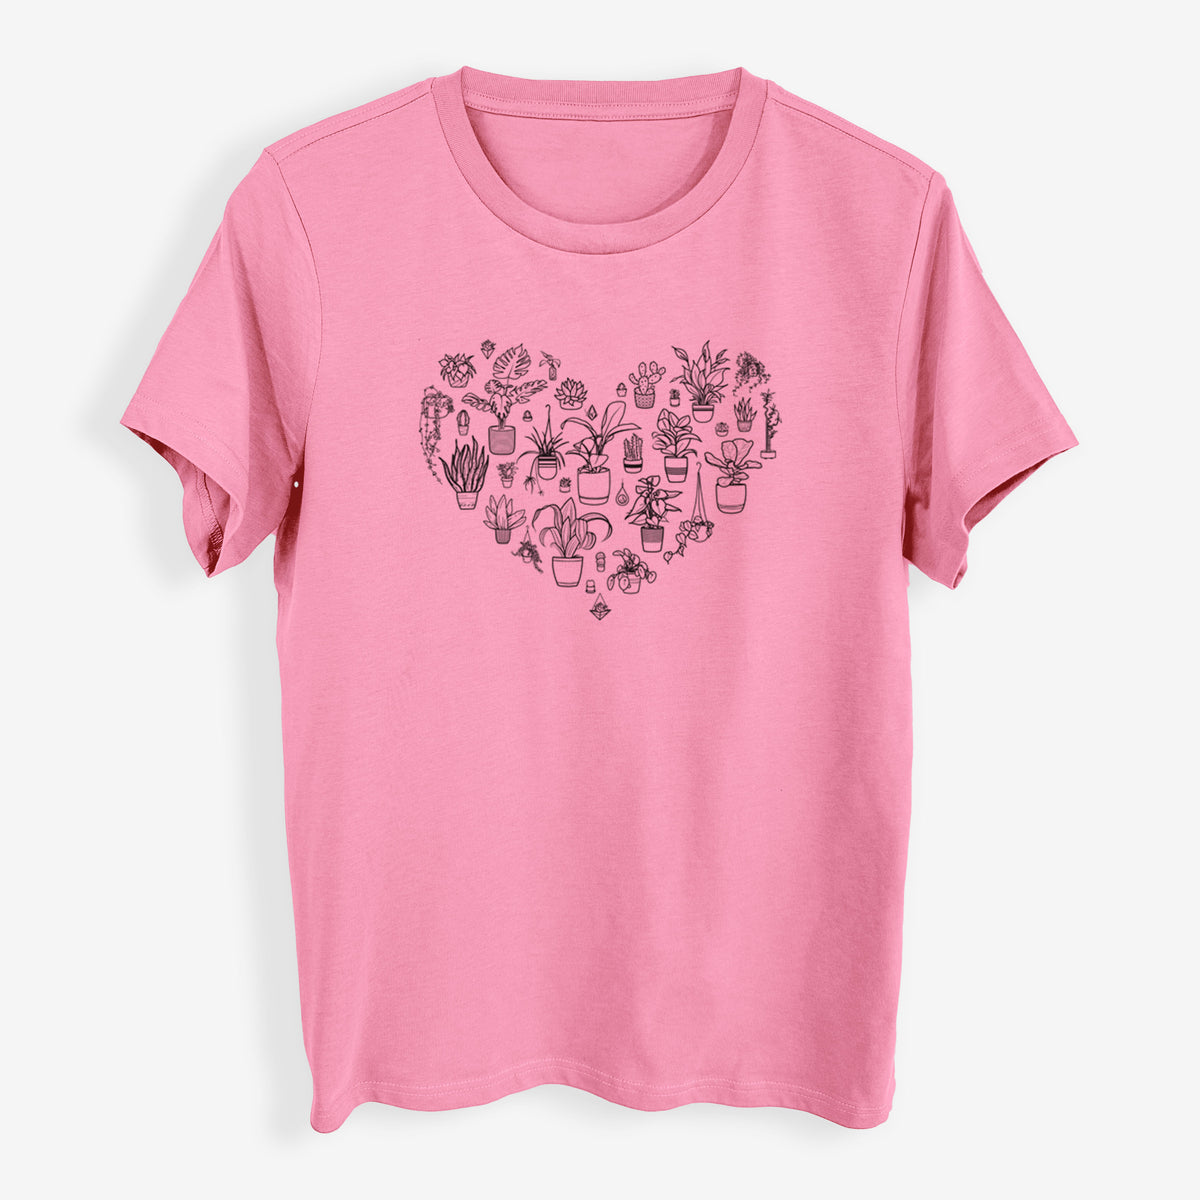 Heart Full of House Plants - Womens Everyday Maple Tee